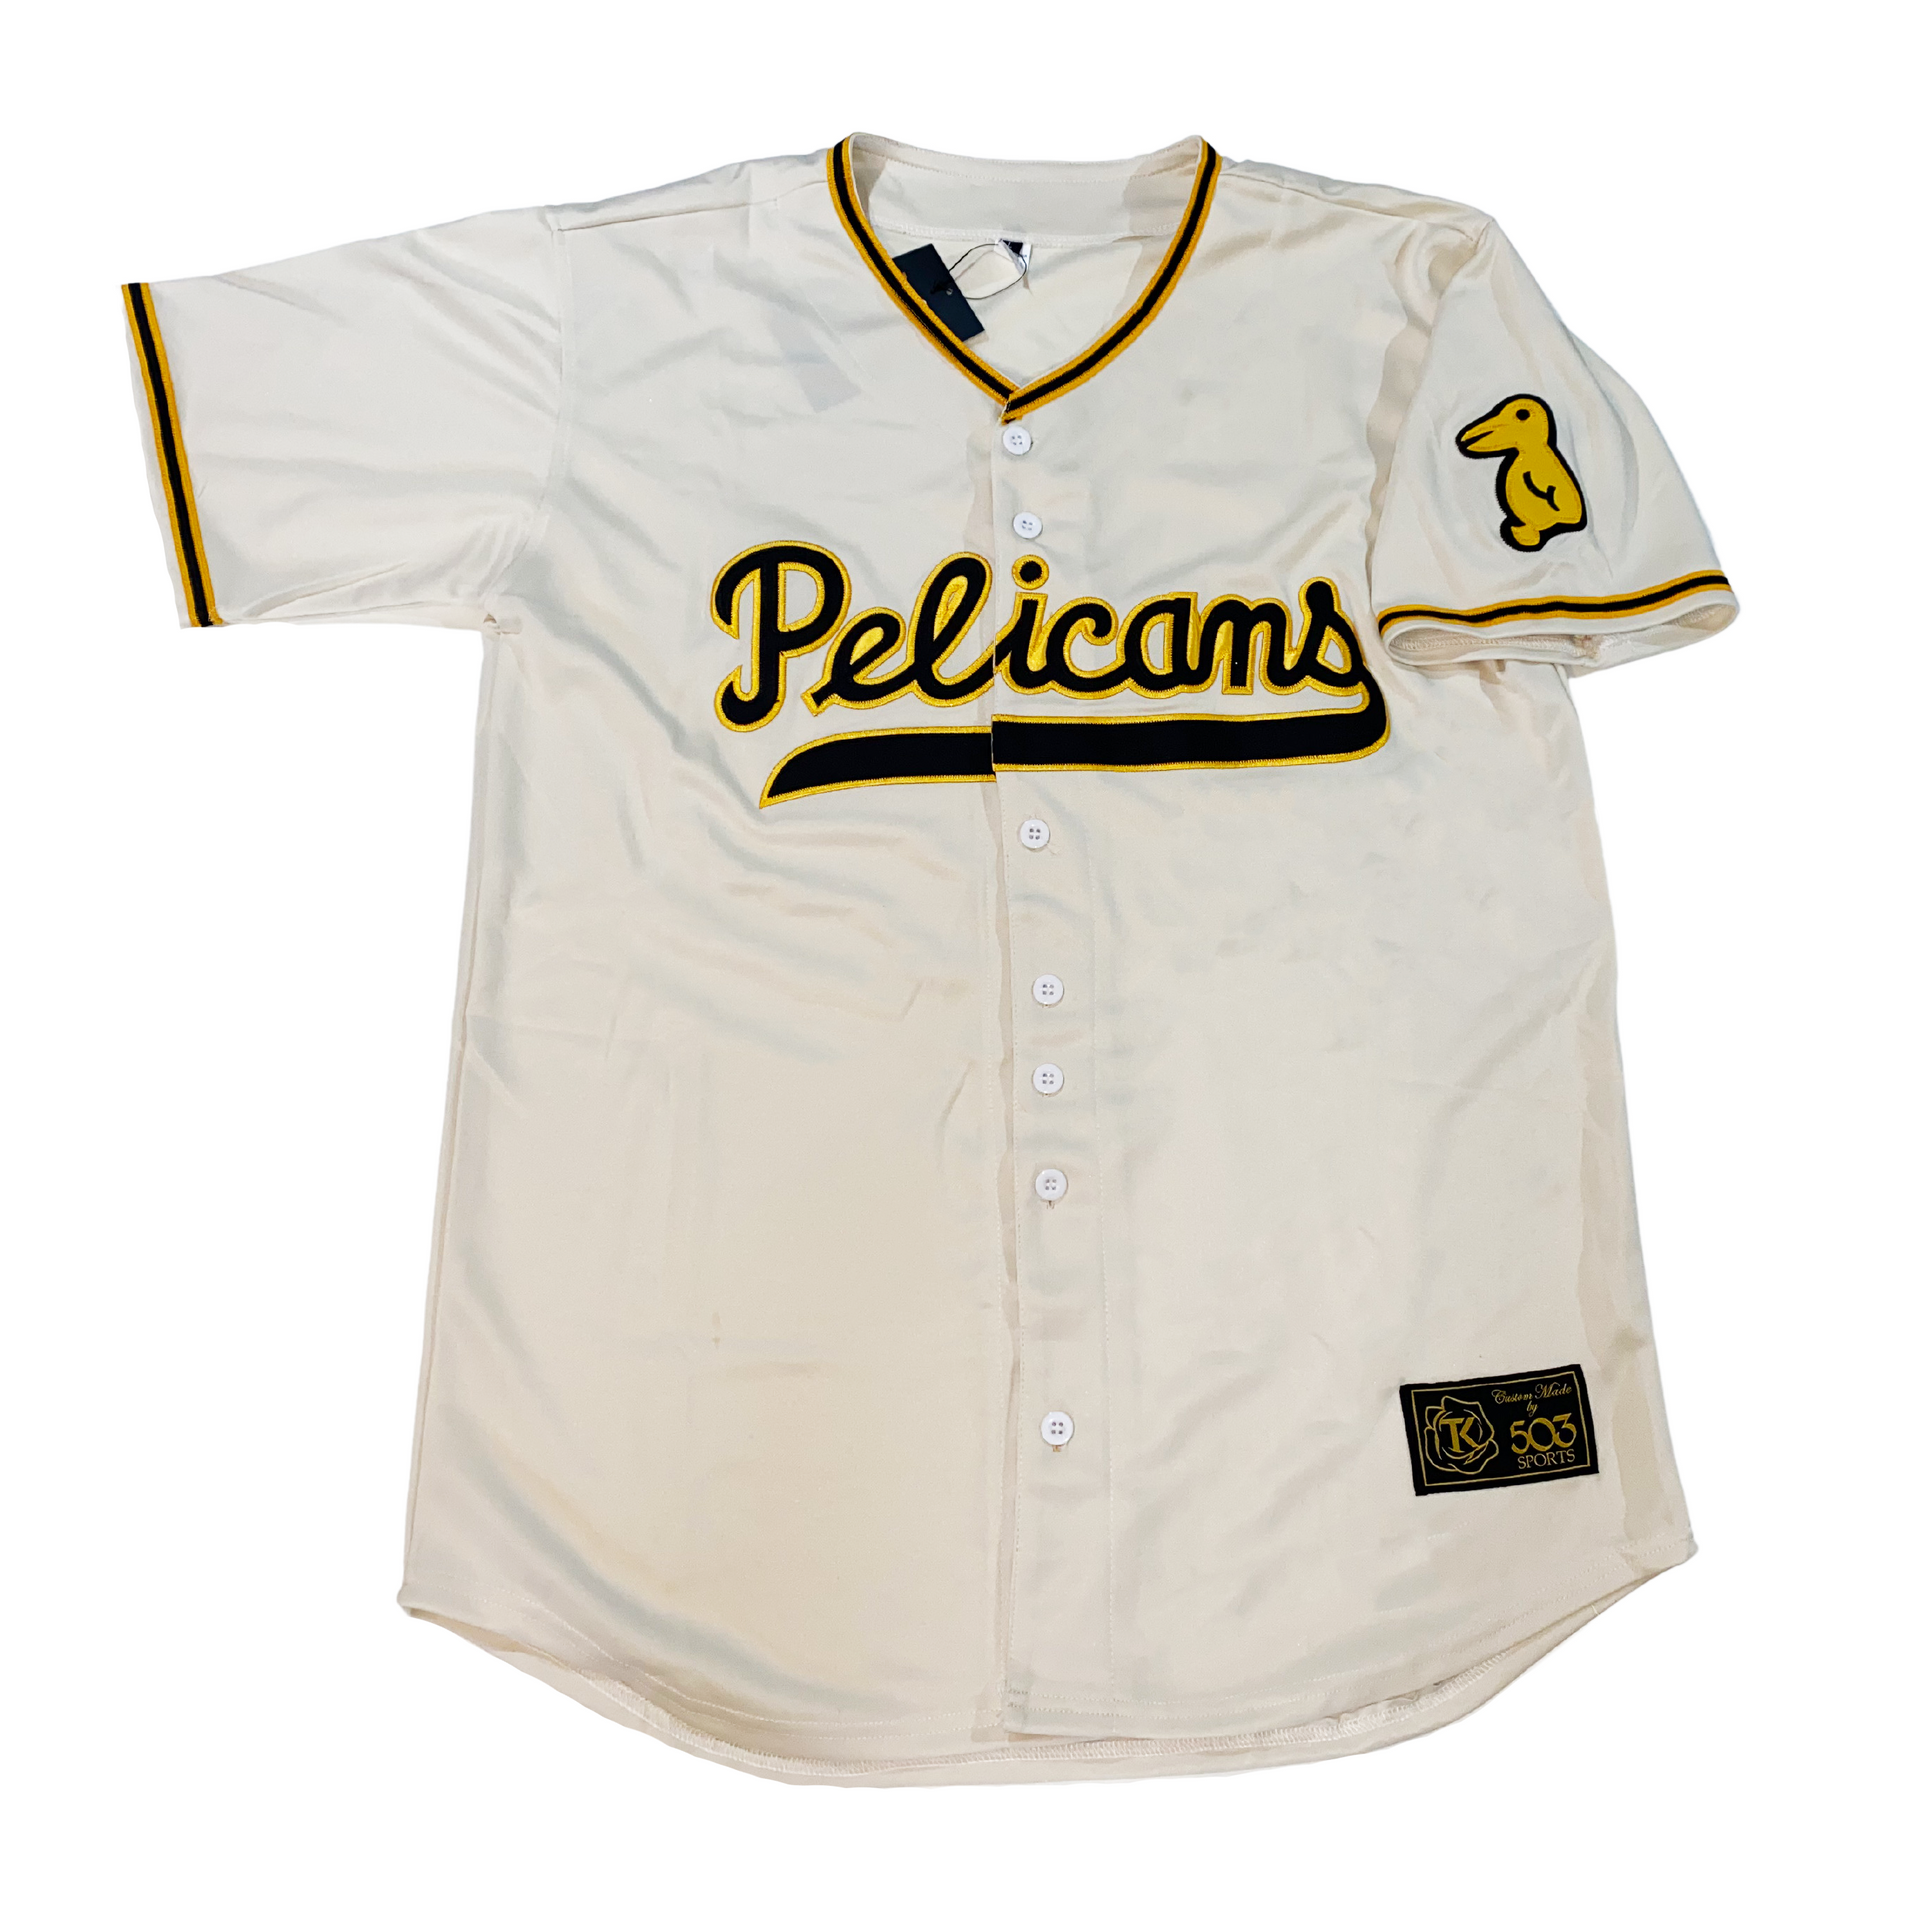 New Orleans Pelicans 1955 Home Jersey  New orleans pelicans, Pelican,  Jersey